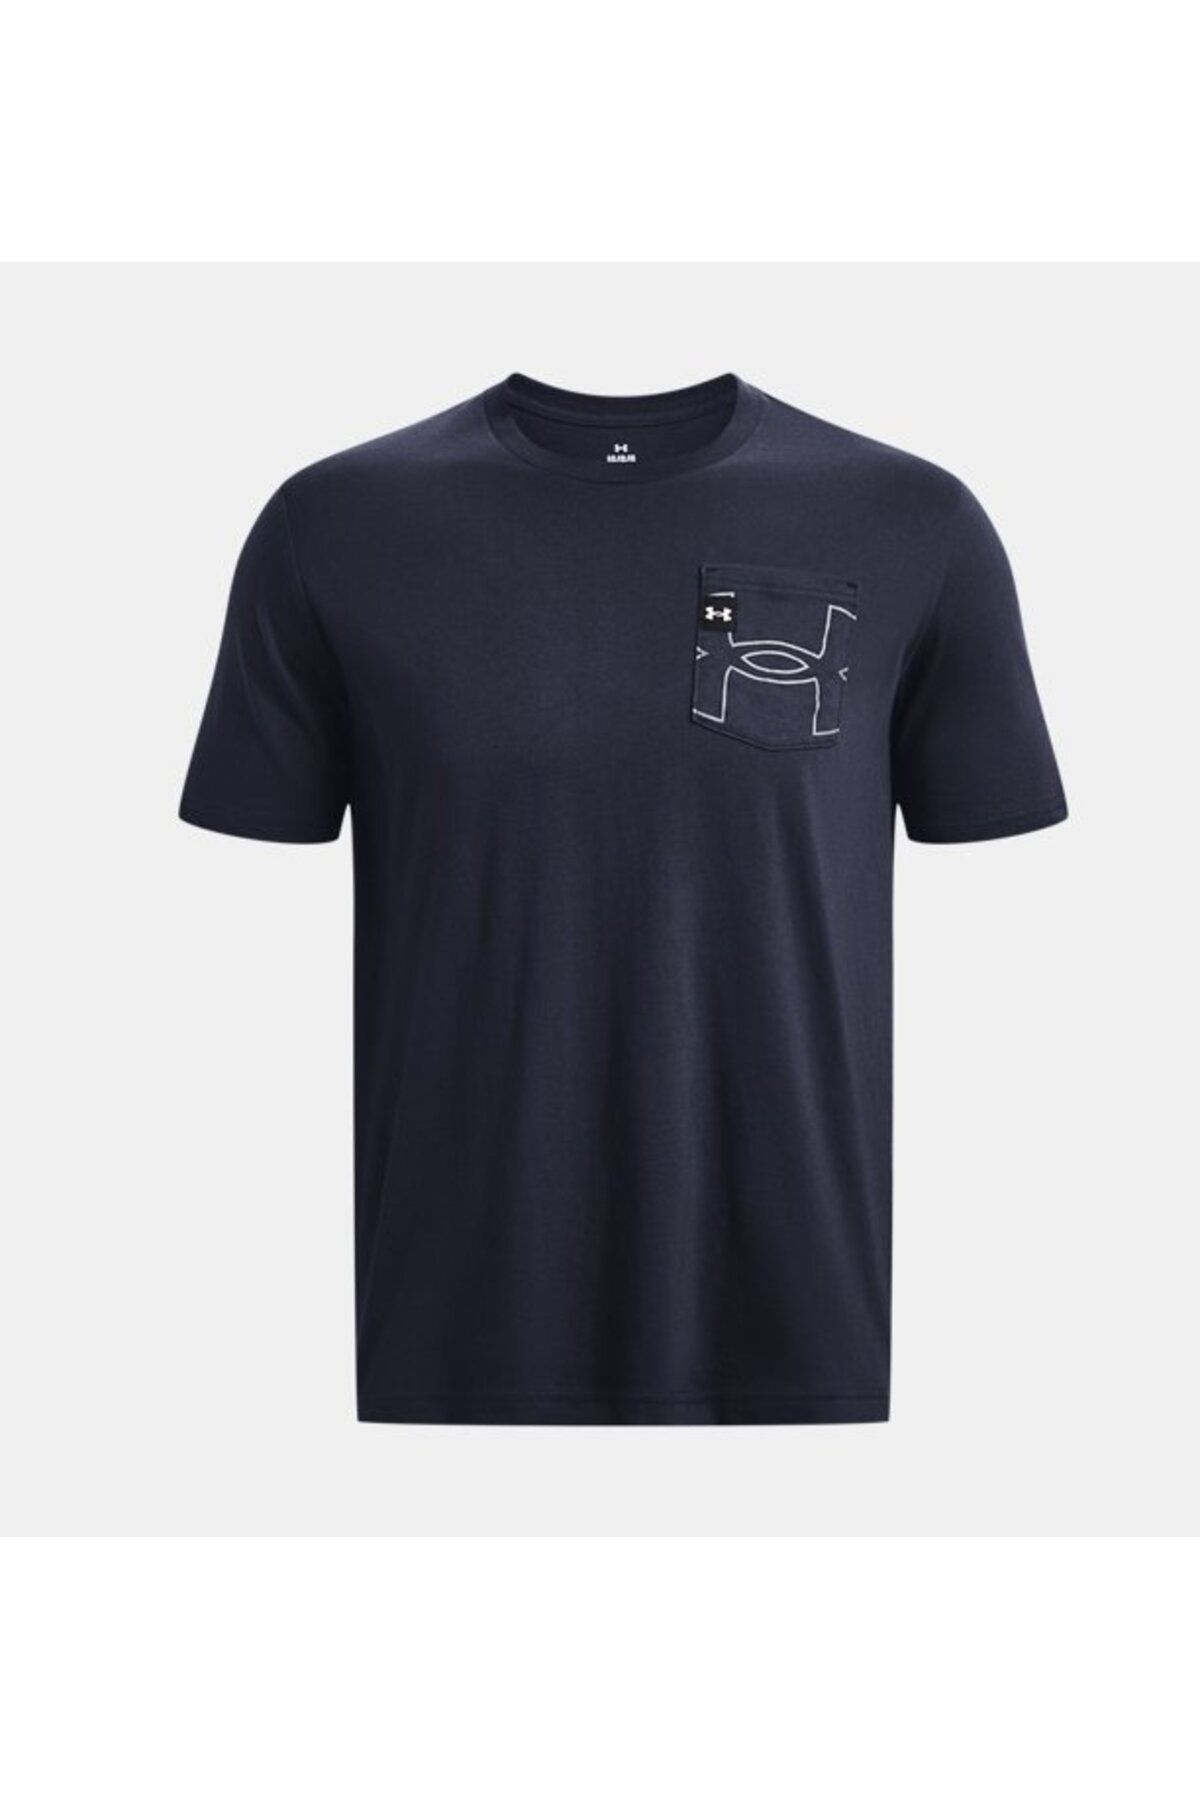 Under Armour Ua Elevated Core Pocket Ss – t-shirts – shop at Booztlet